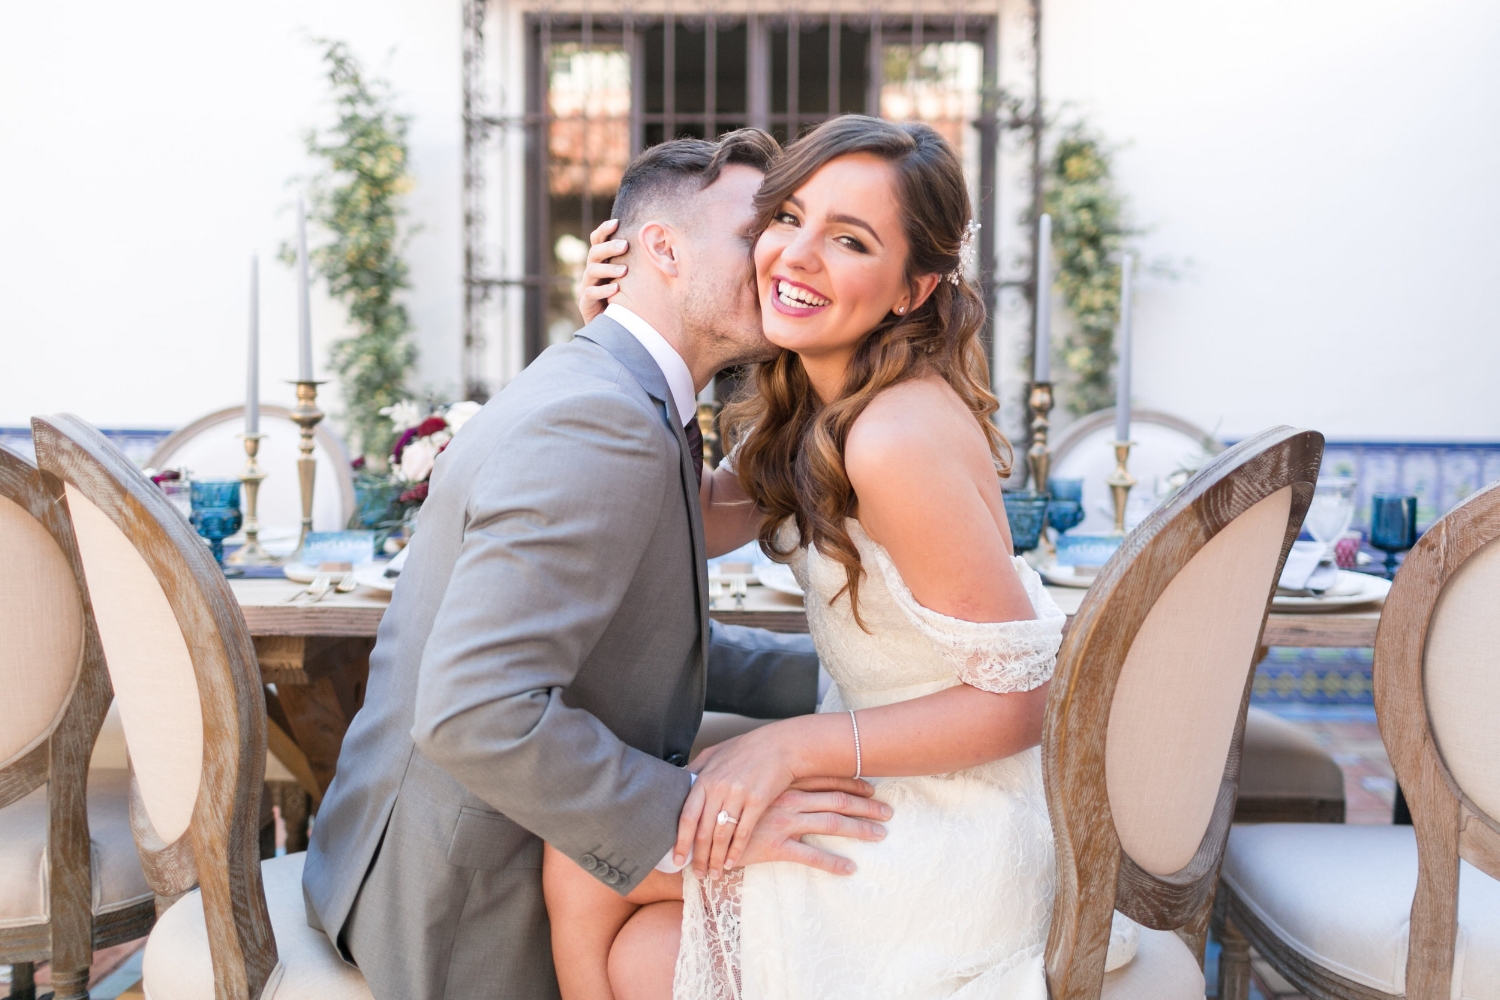 Wedding Photos with Brunette Bride. Long Hairstyle and Natural Makeup. Bridal Beauty by Vanity Belle in Orange County (Costa Mesa) and San Diego (La Jolla)